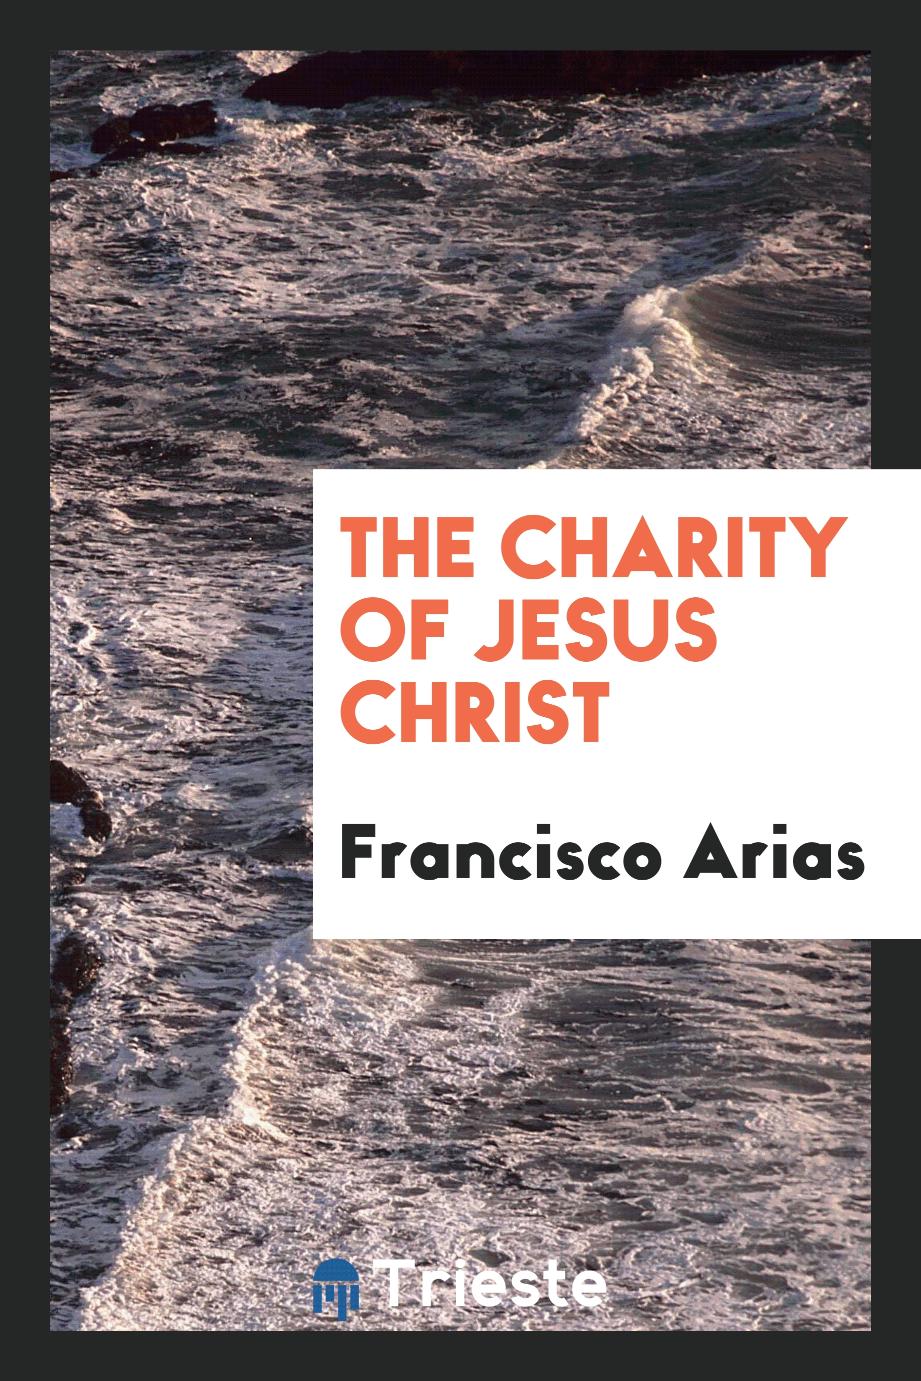 The charity of Jesus Christ